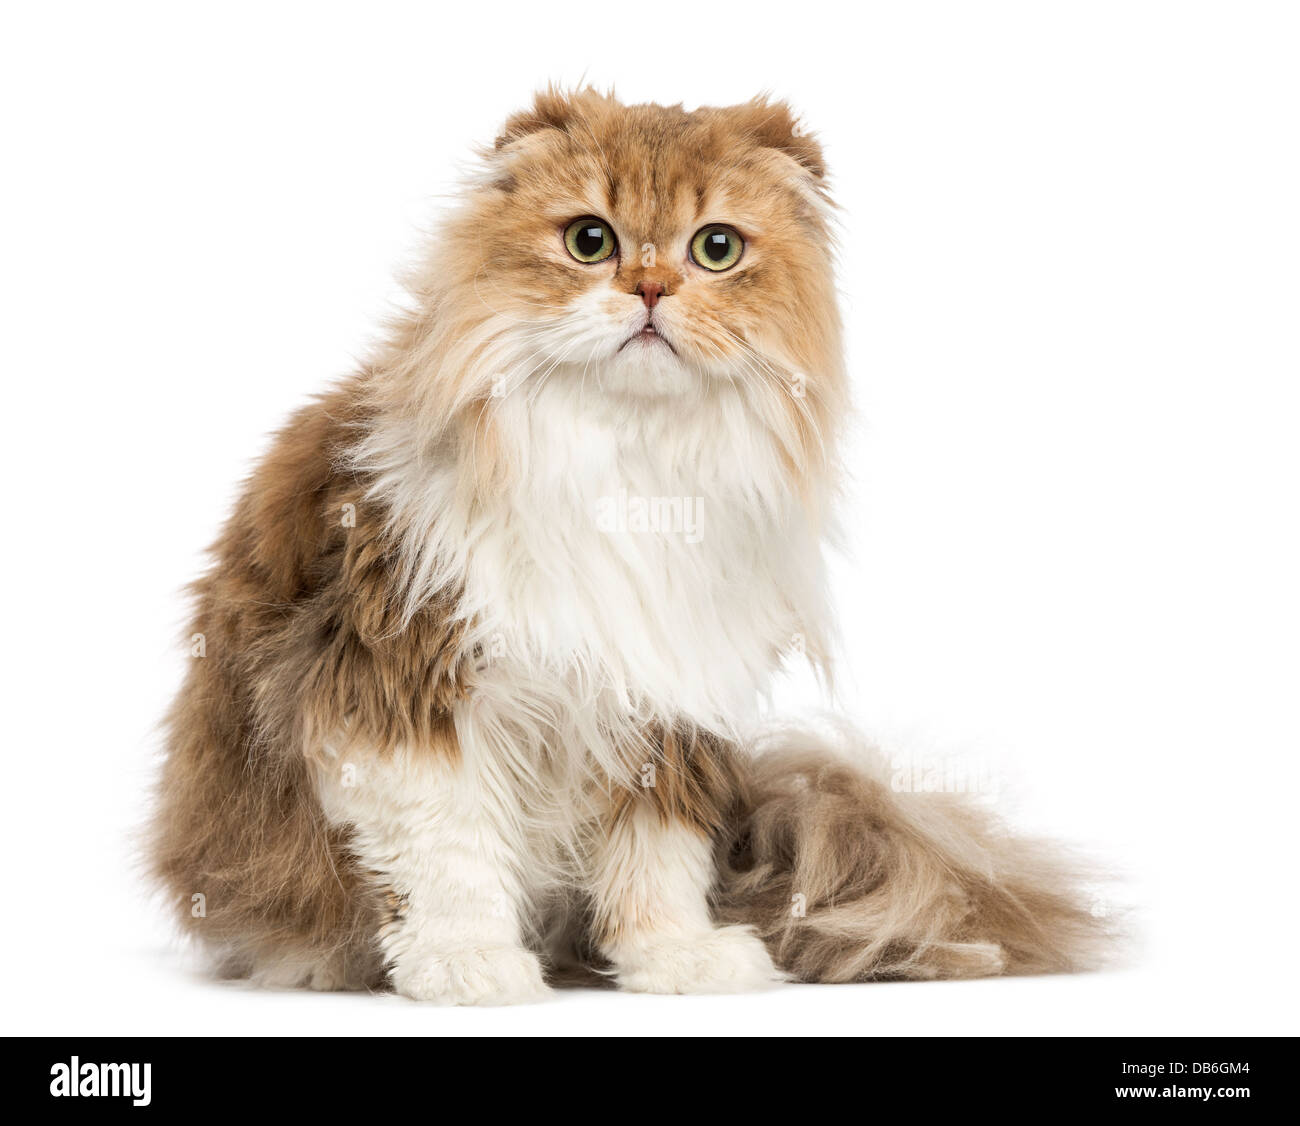 Highland Fold cat sitting against white background Banque D'Images